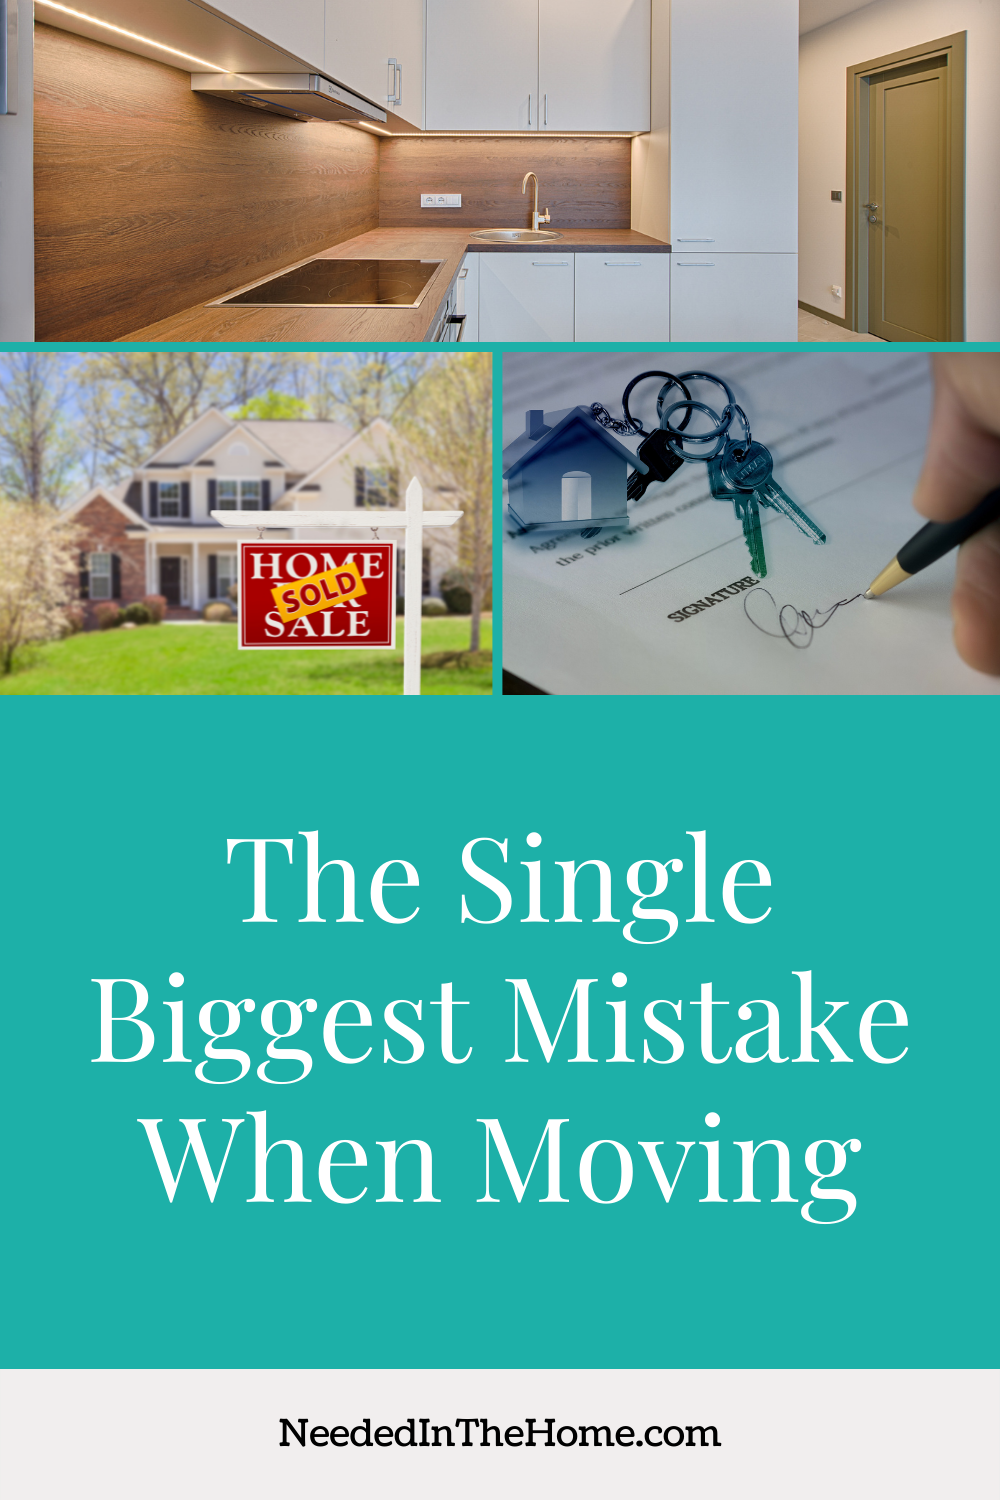 pinterest-pin-description the single biggest mistake when moving neededinthehome images of empty kitchen home with for sale and sold sign in front pen signing contract with house keys on paper